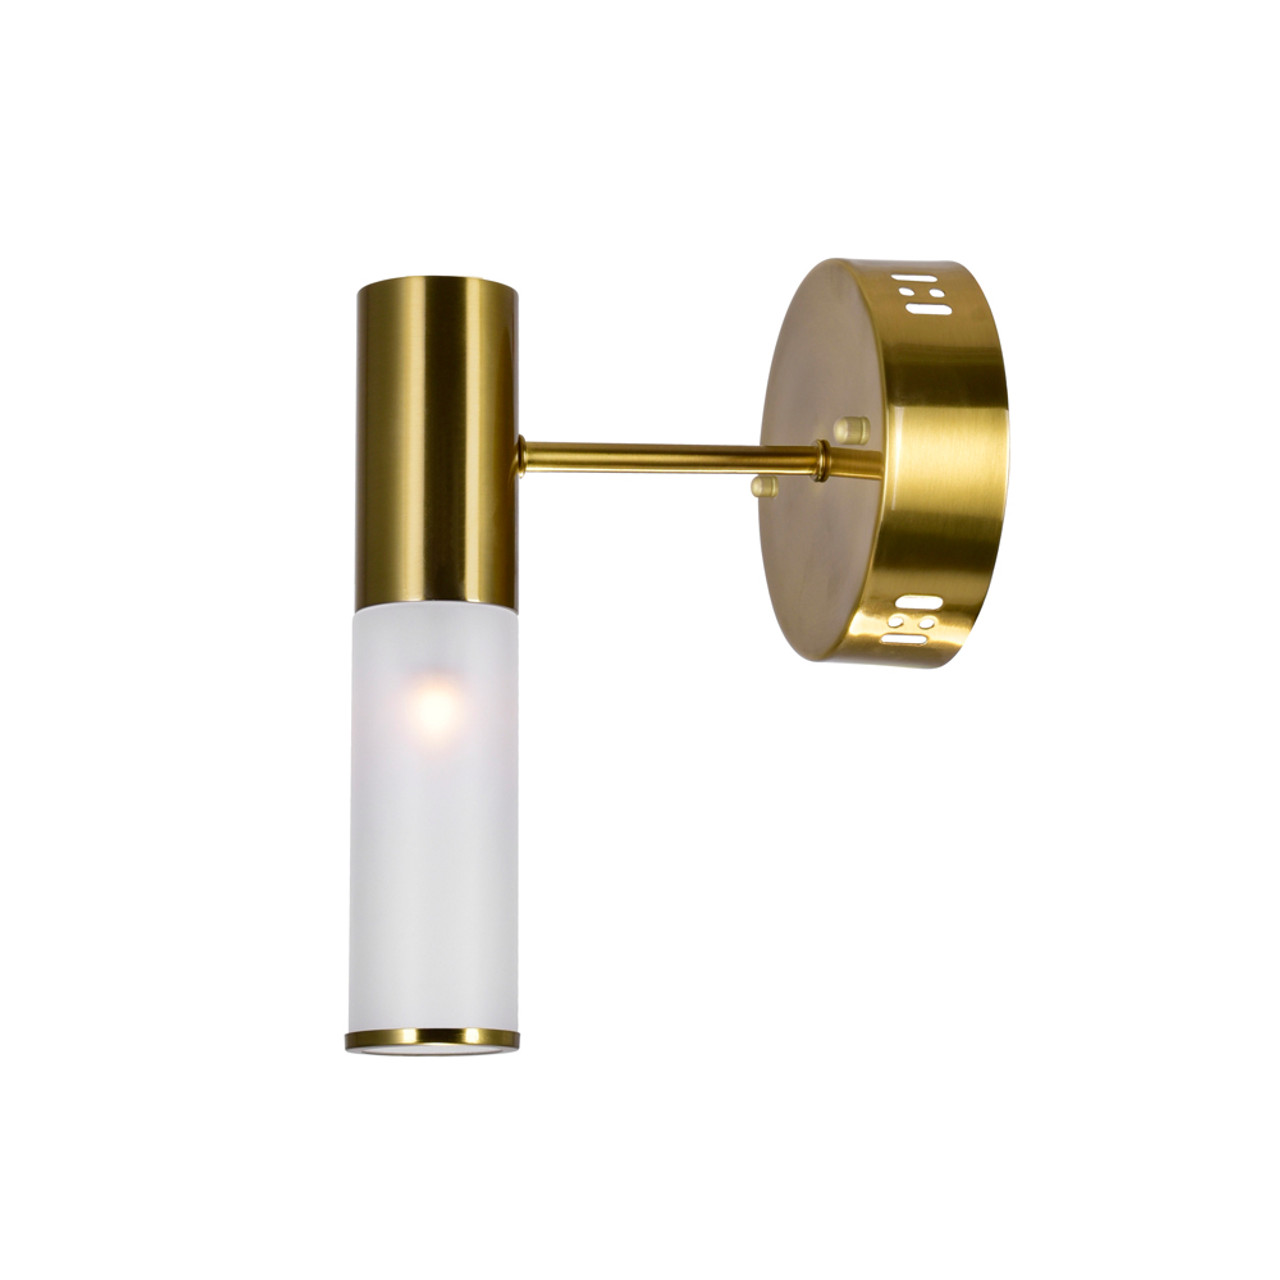 CWI LIGHTING 1221W7-1-625 1 Light Sconce with Brass Finish